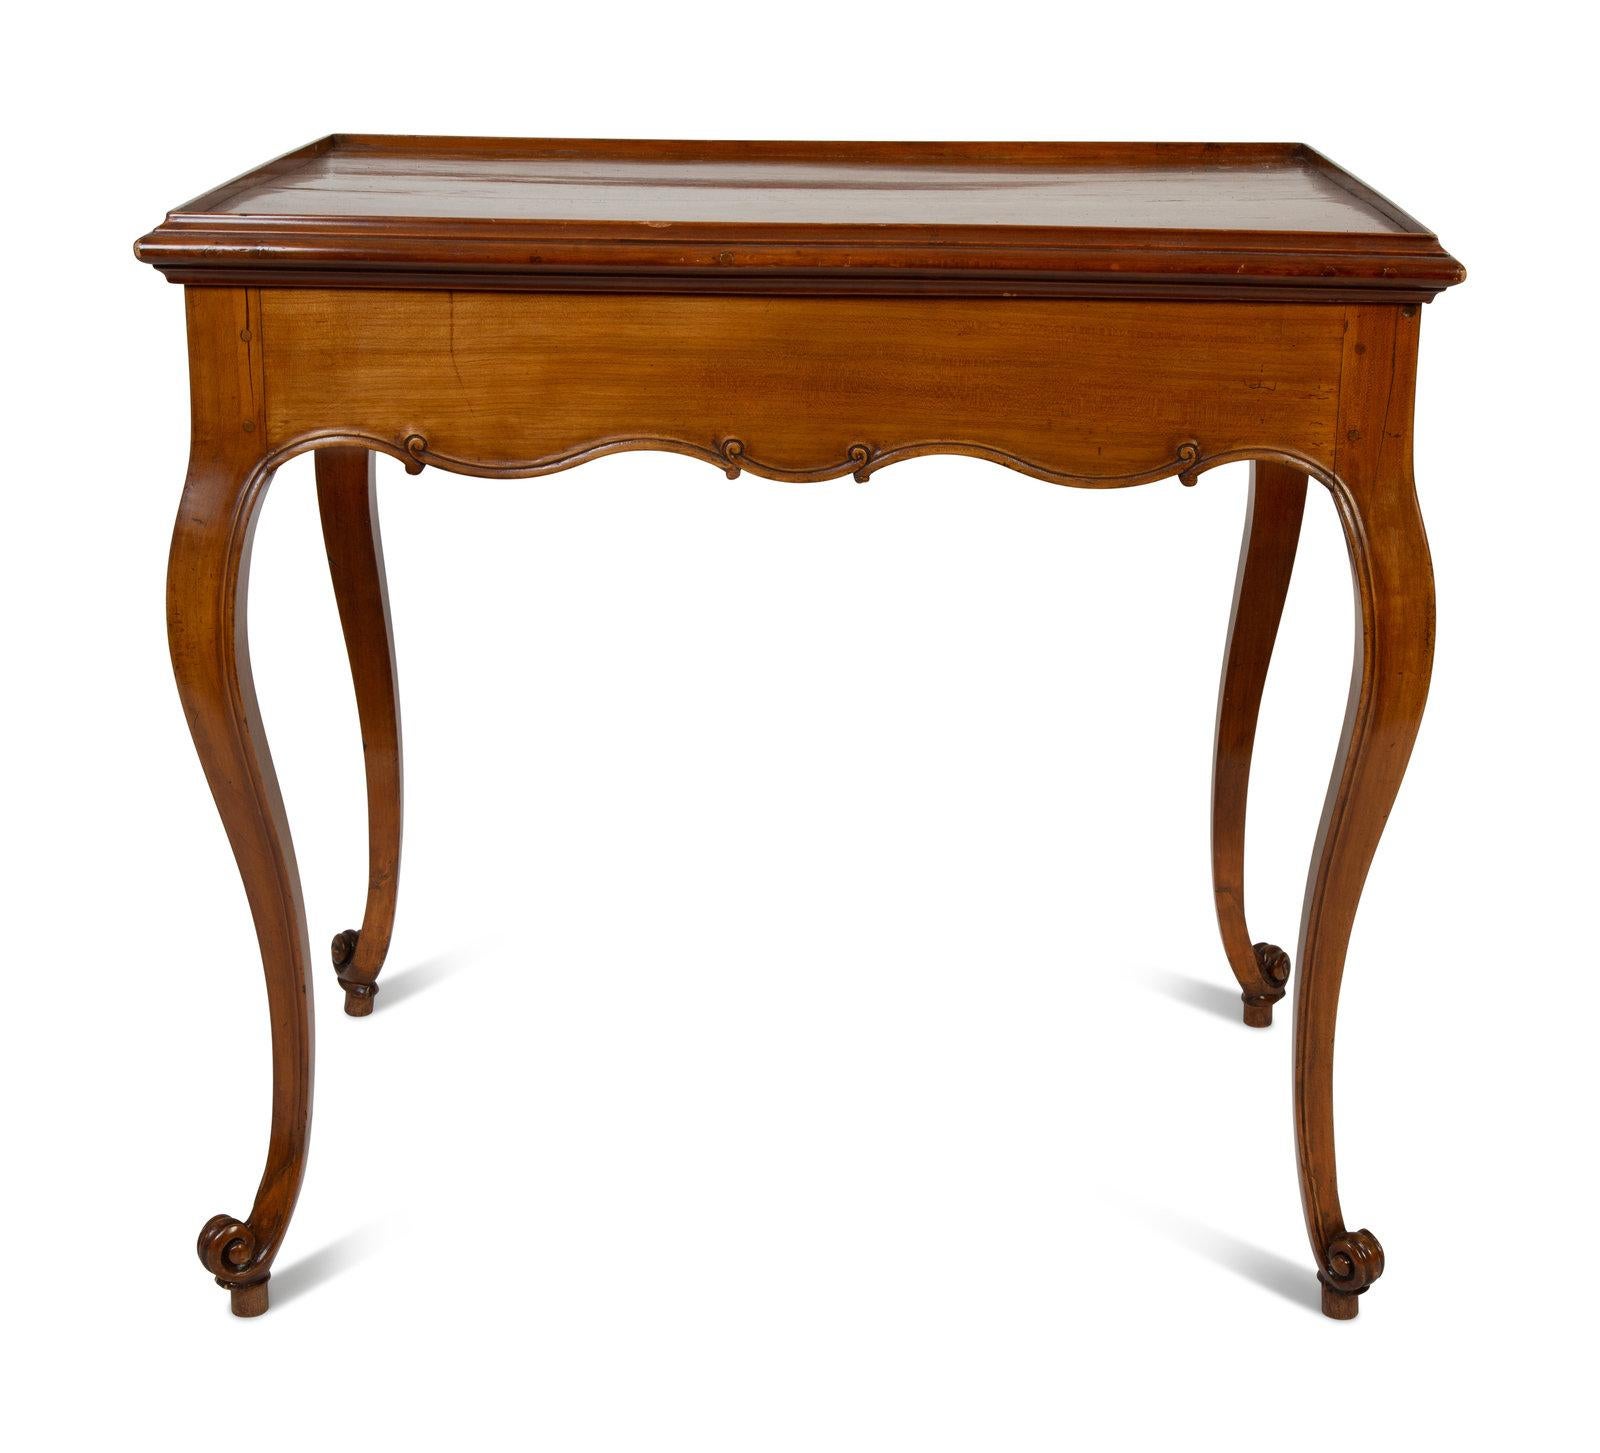 French cabriole leg flip-top games console table. Carved fruitwood with scalloped apron and finely tapered legs.